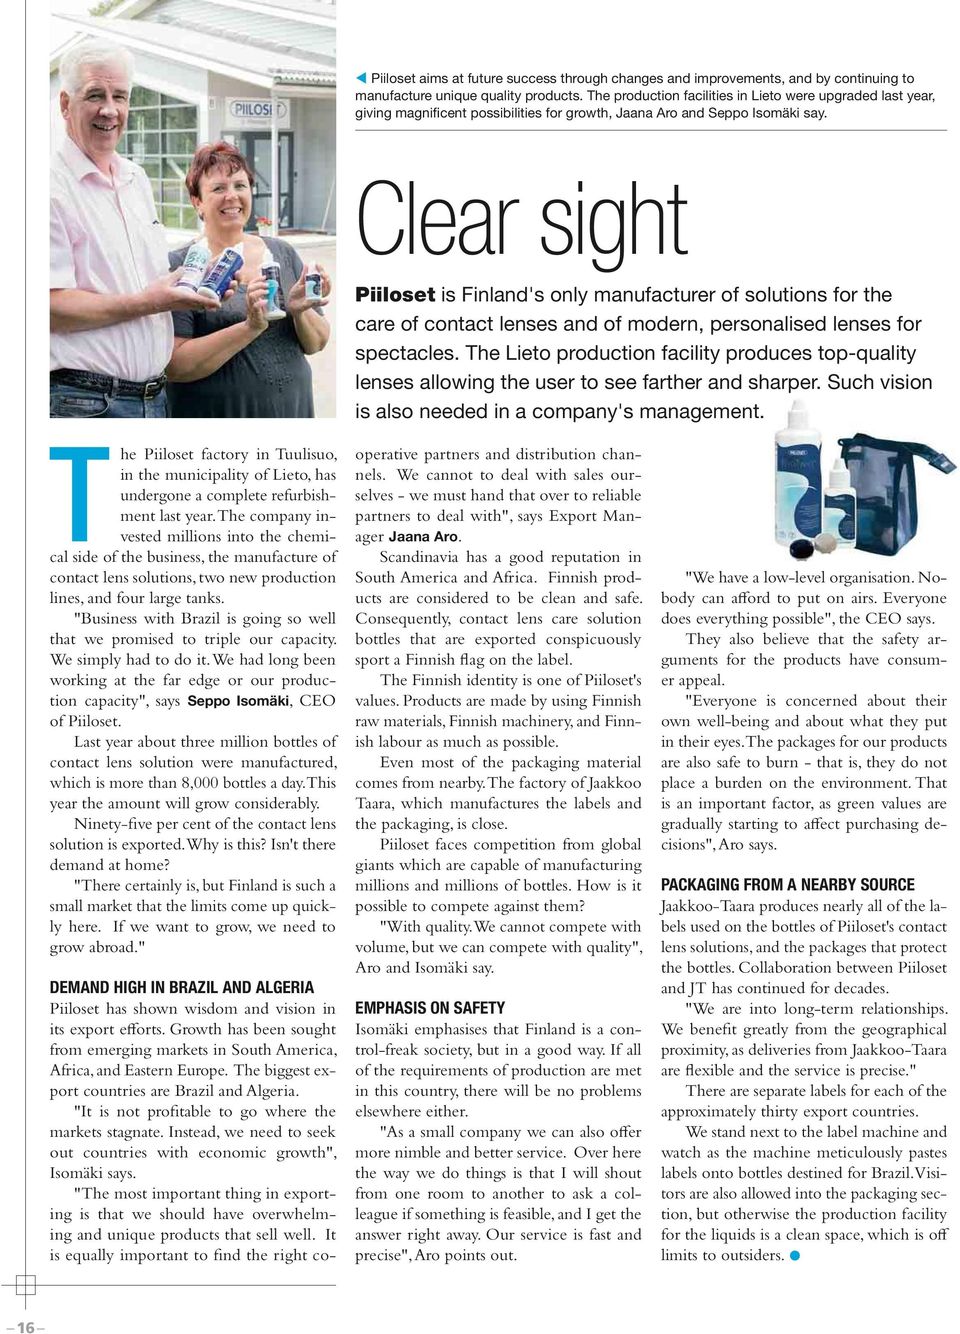 Clear sight Piiloset is Finland's only manufacturer of solutions for the care of contact lenses and of modern, personalised lenses for spectacles.